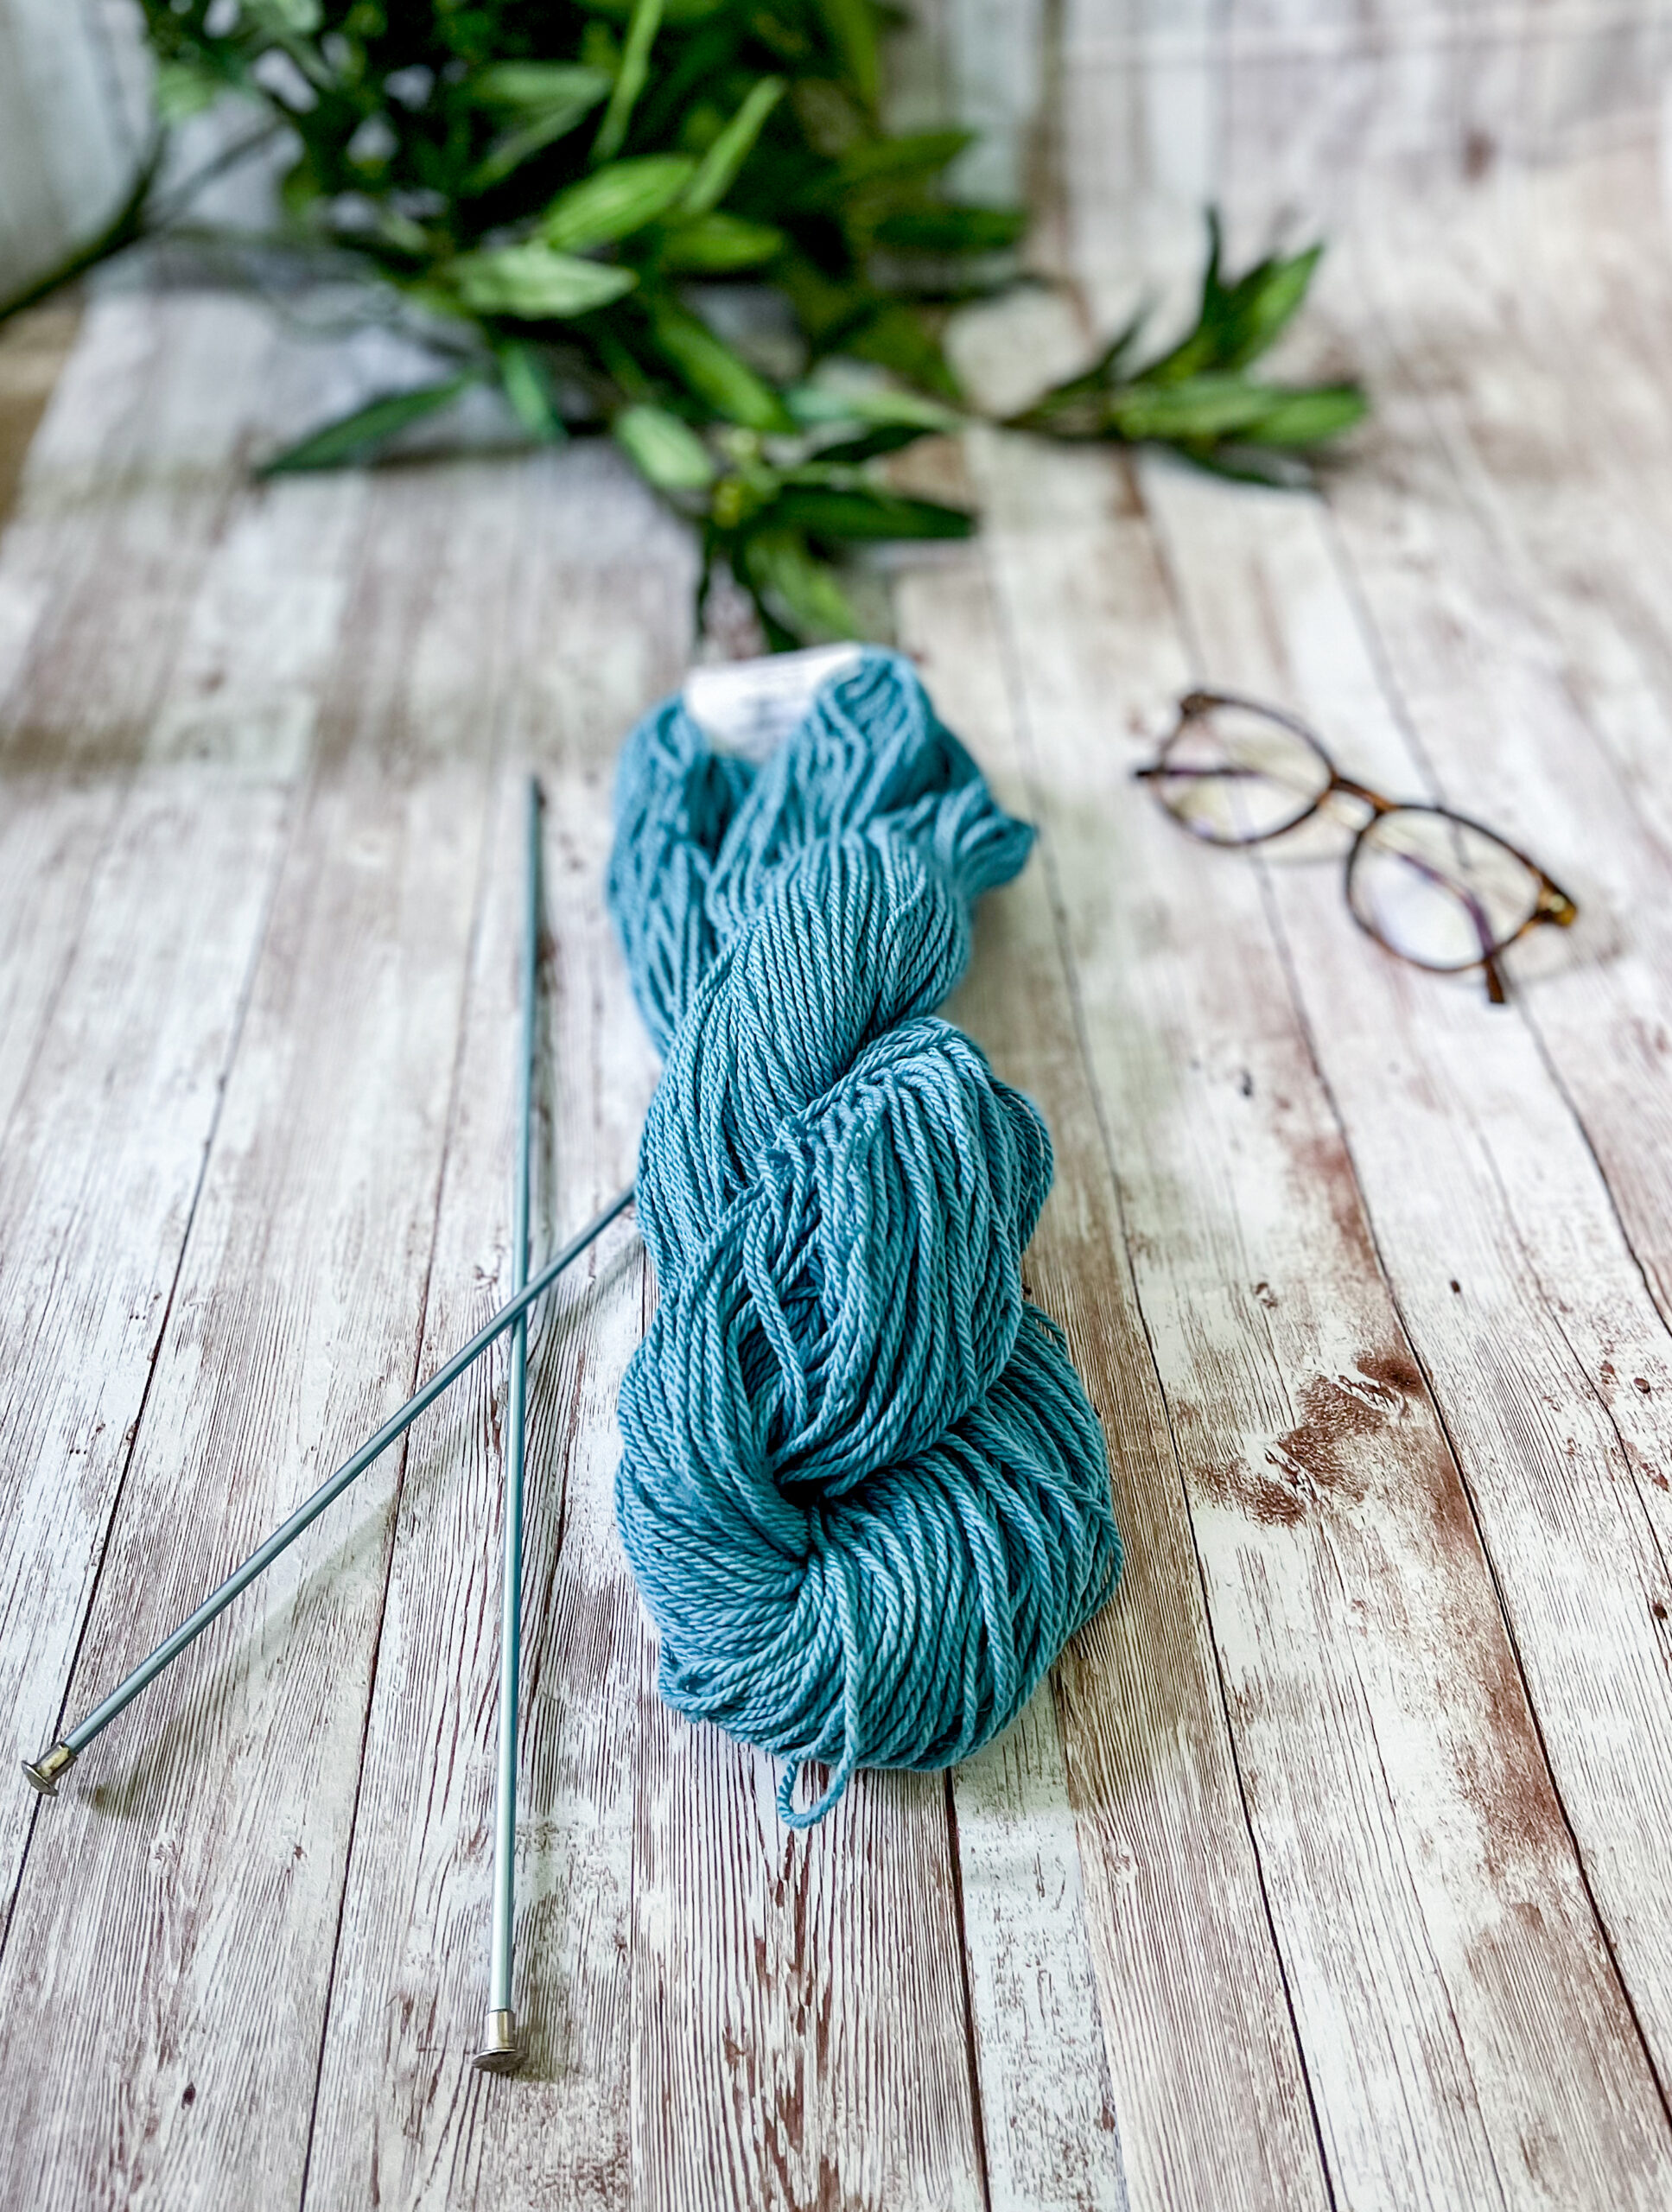 A skein of blue Virginia-grown cotton rests on a wood panel, with a pair of knitting needles, reading glasses and greenery around it